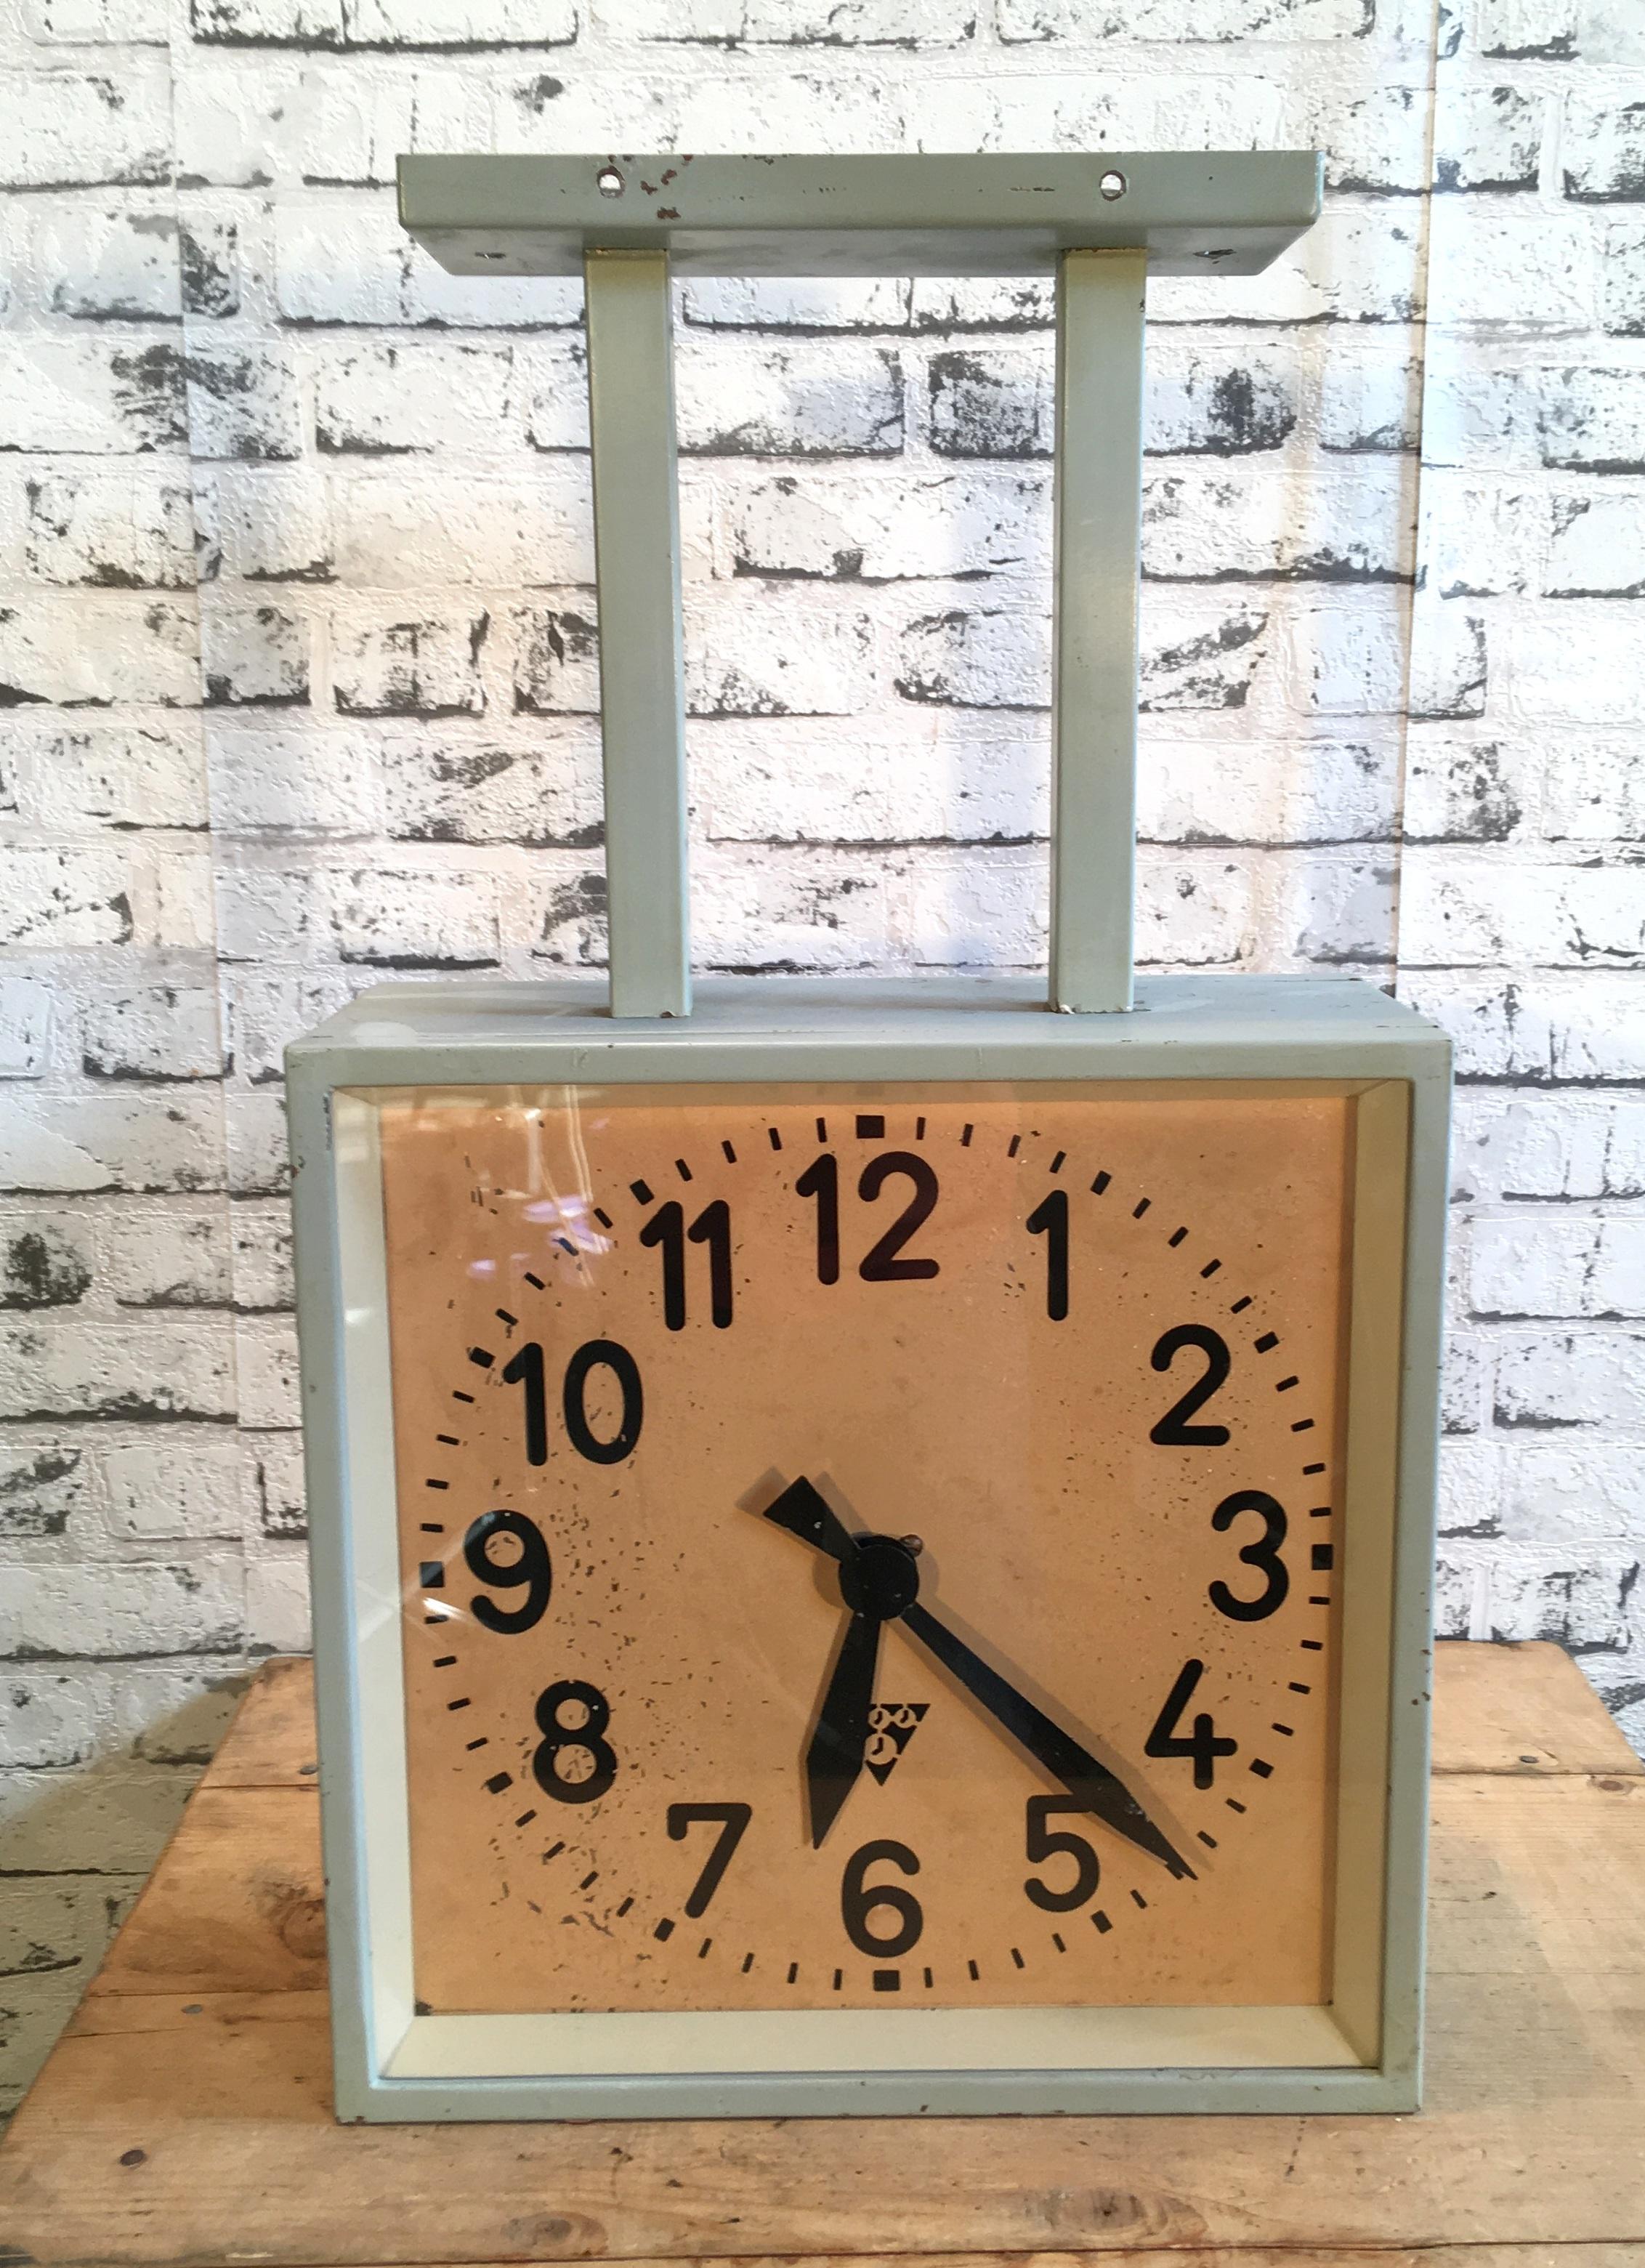 This square double-sided railway or factory clock was produced by Pragotron, in former Czechoslovakia, during the 1950s. The piece features a grey metal body and a clear glass cover. The clock has been converted into a battery-powered clockwork and